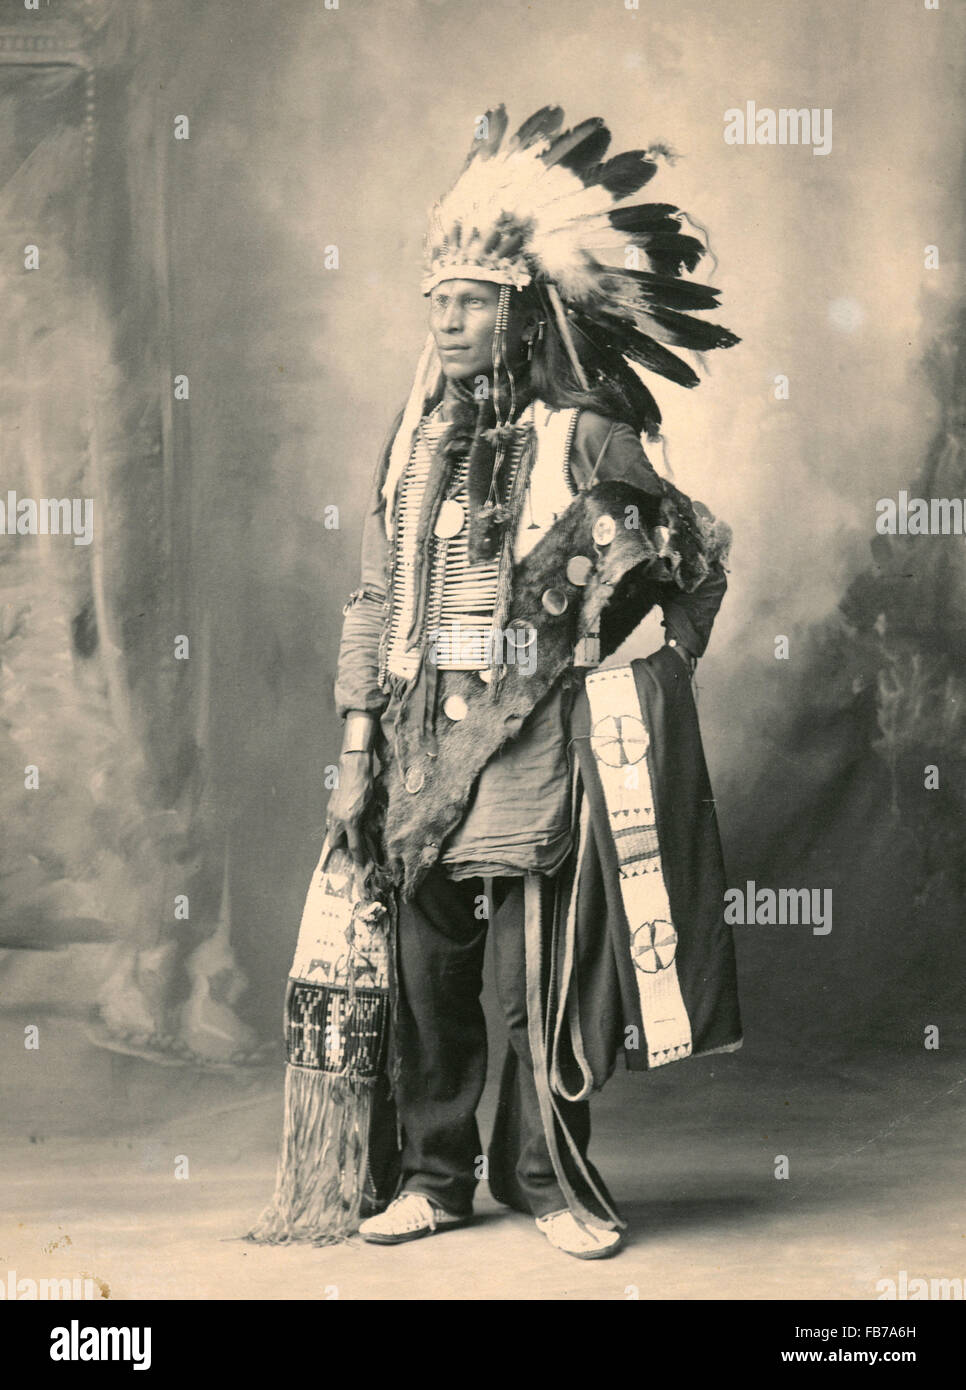 Native American Indian, Spotted Horse, Indien Sioux Banque D'Images